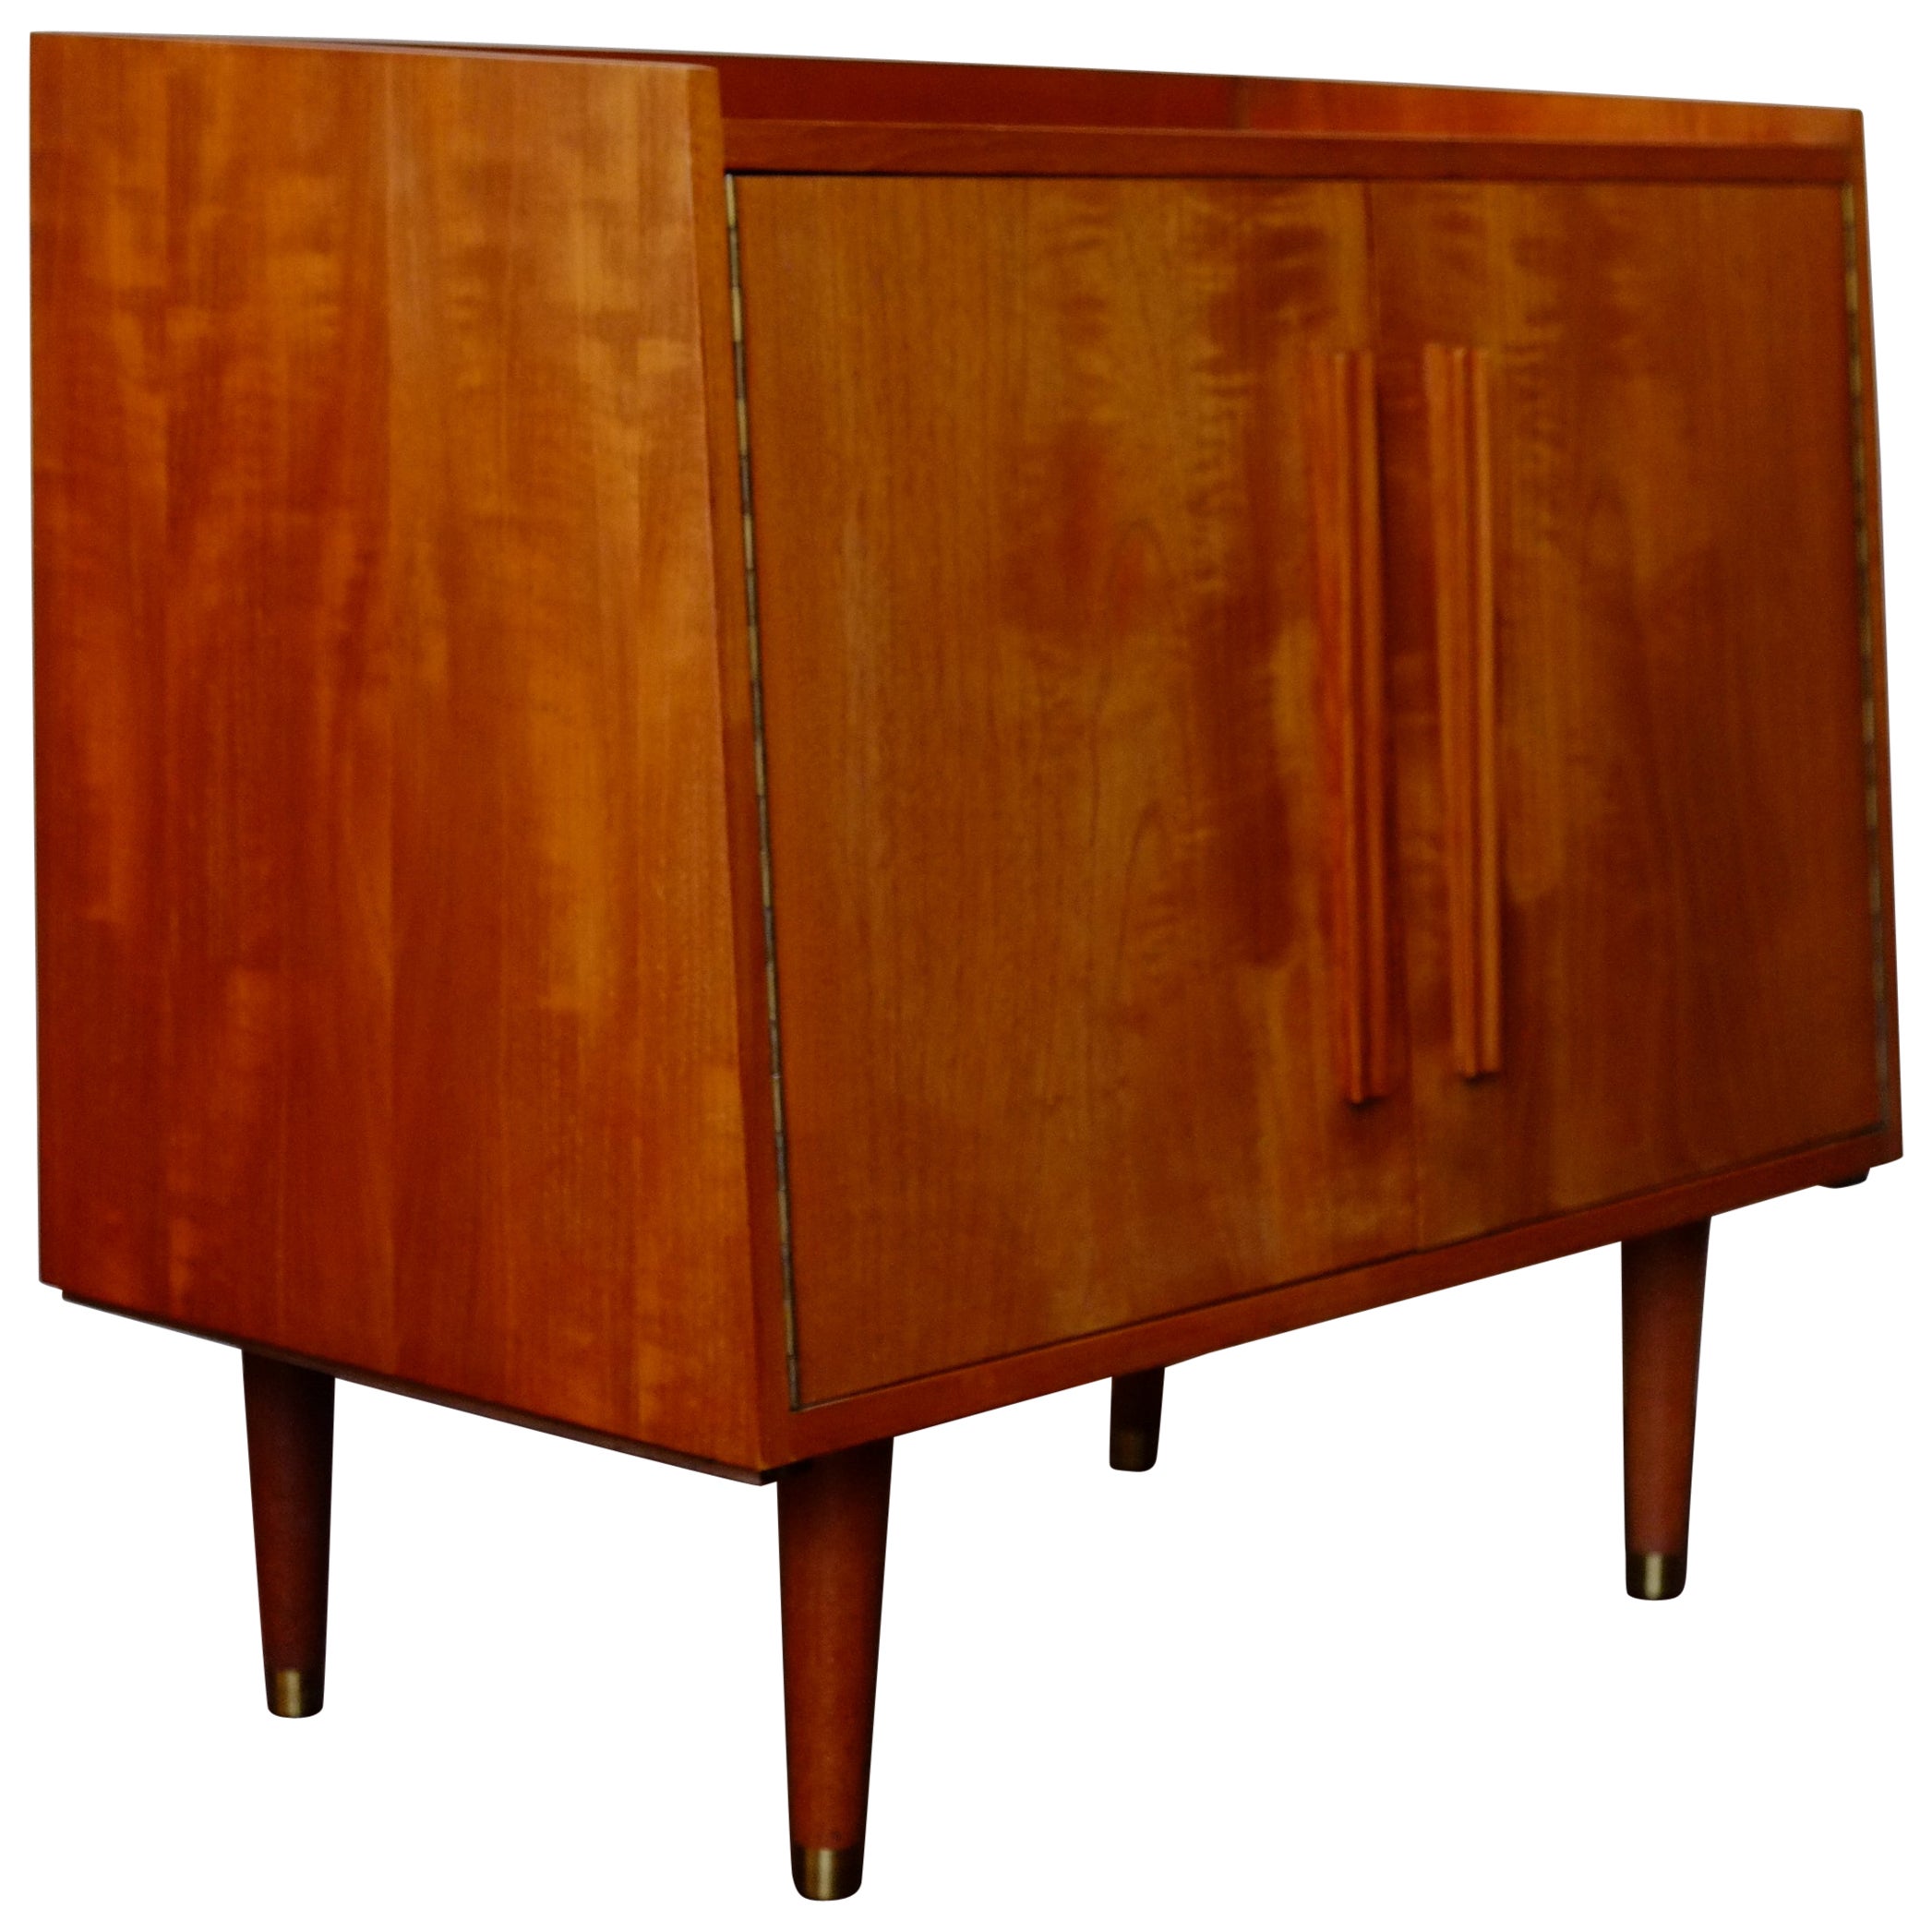 Mid-Century Modern Danish Record Cabinet Compact Sideboard with Brass Feet